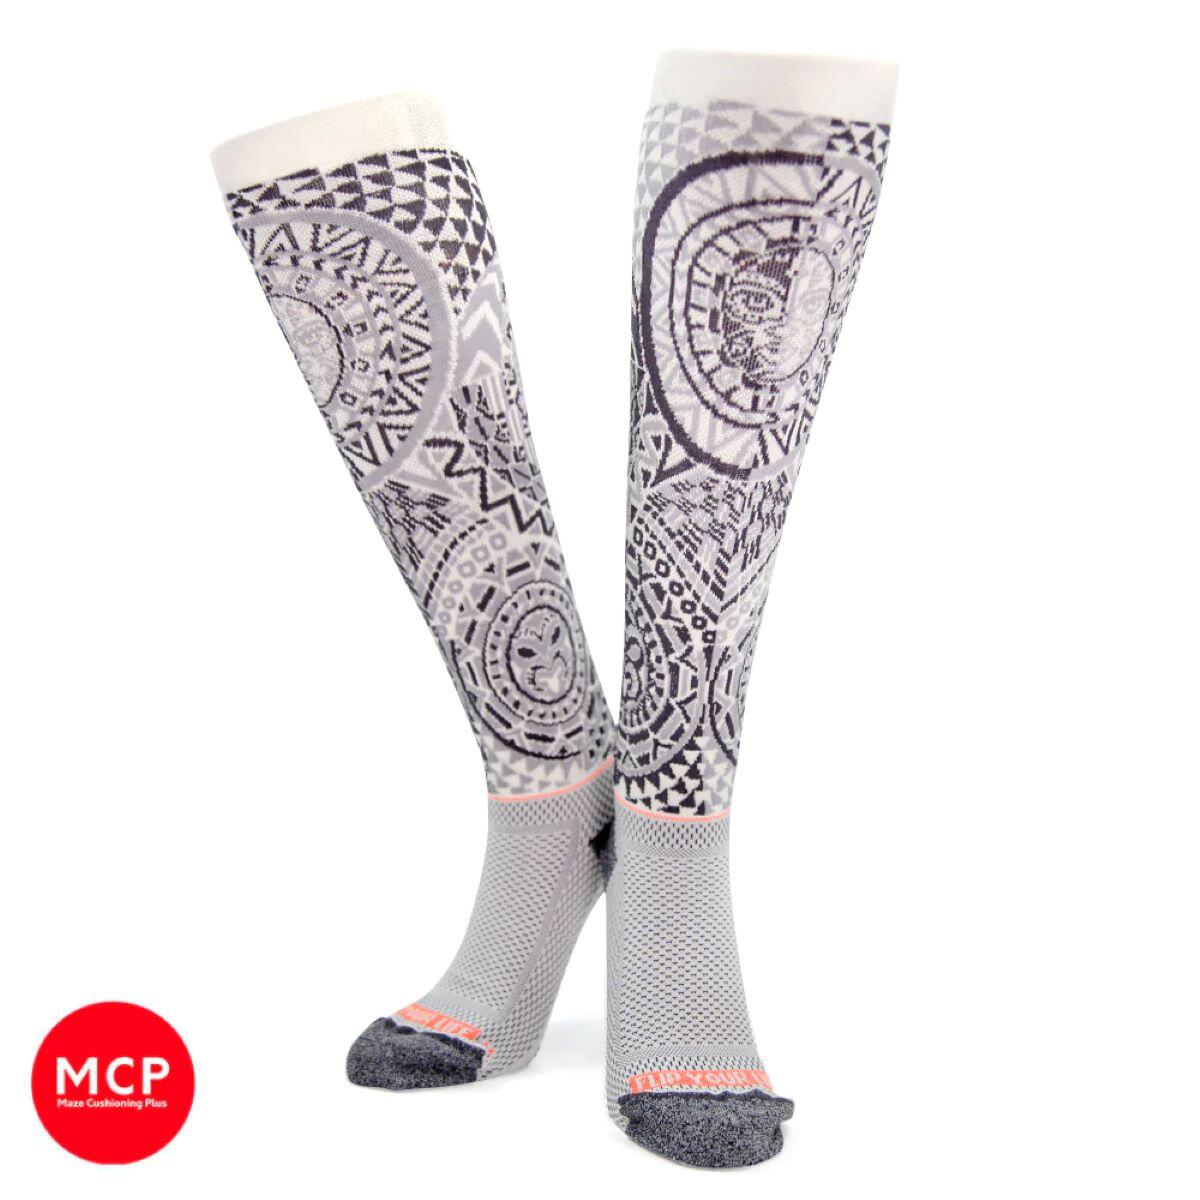 Plus Size Compression Socks Wide Calf Knee High Support Stockings Unisex |  eBay